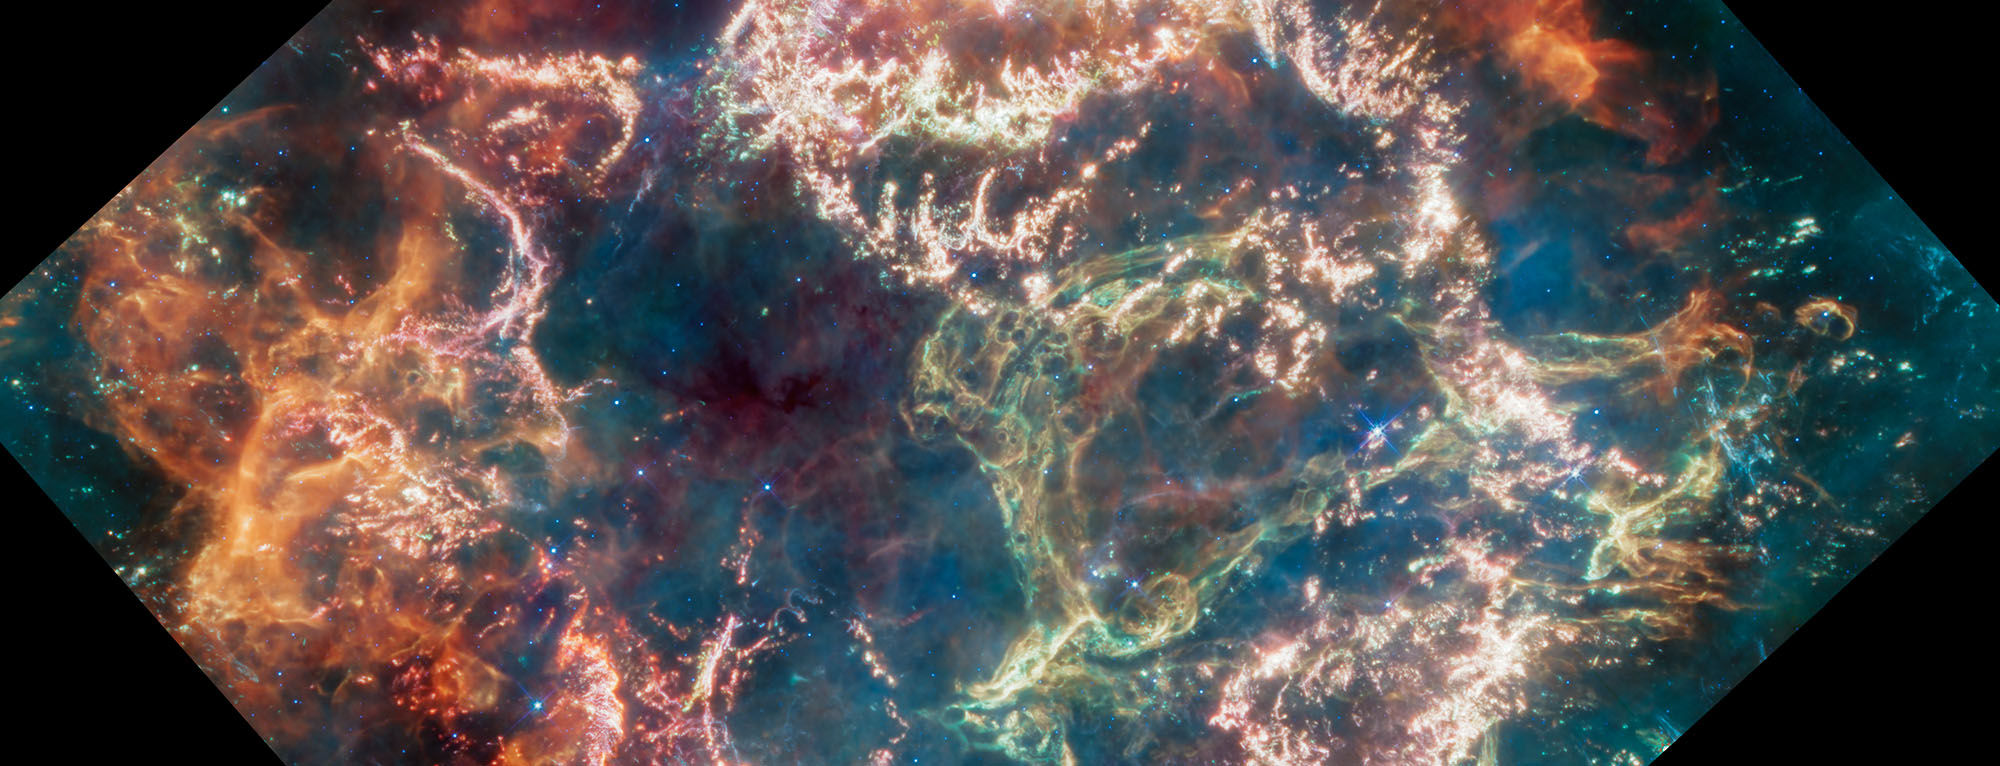 stars and gas clouds in space